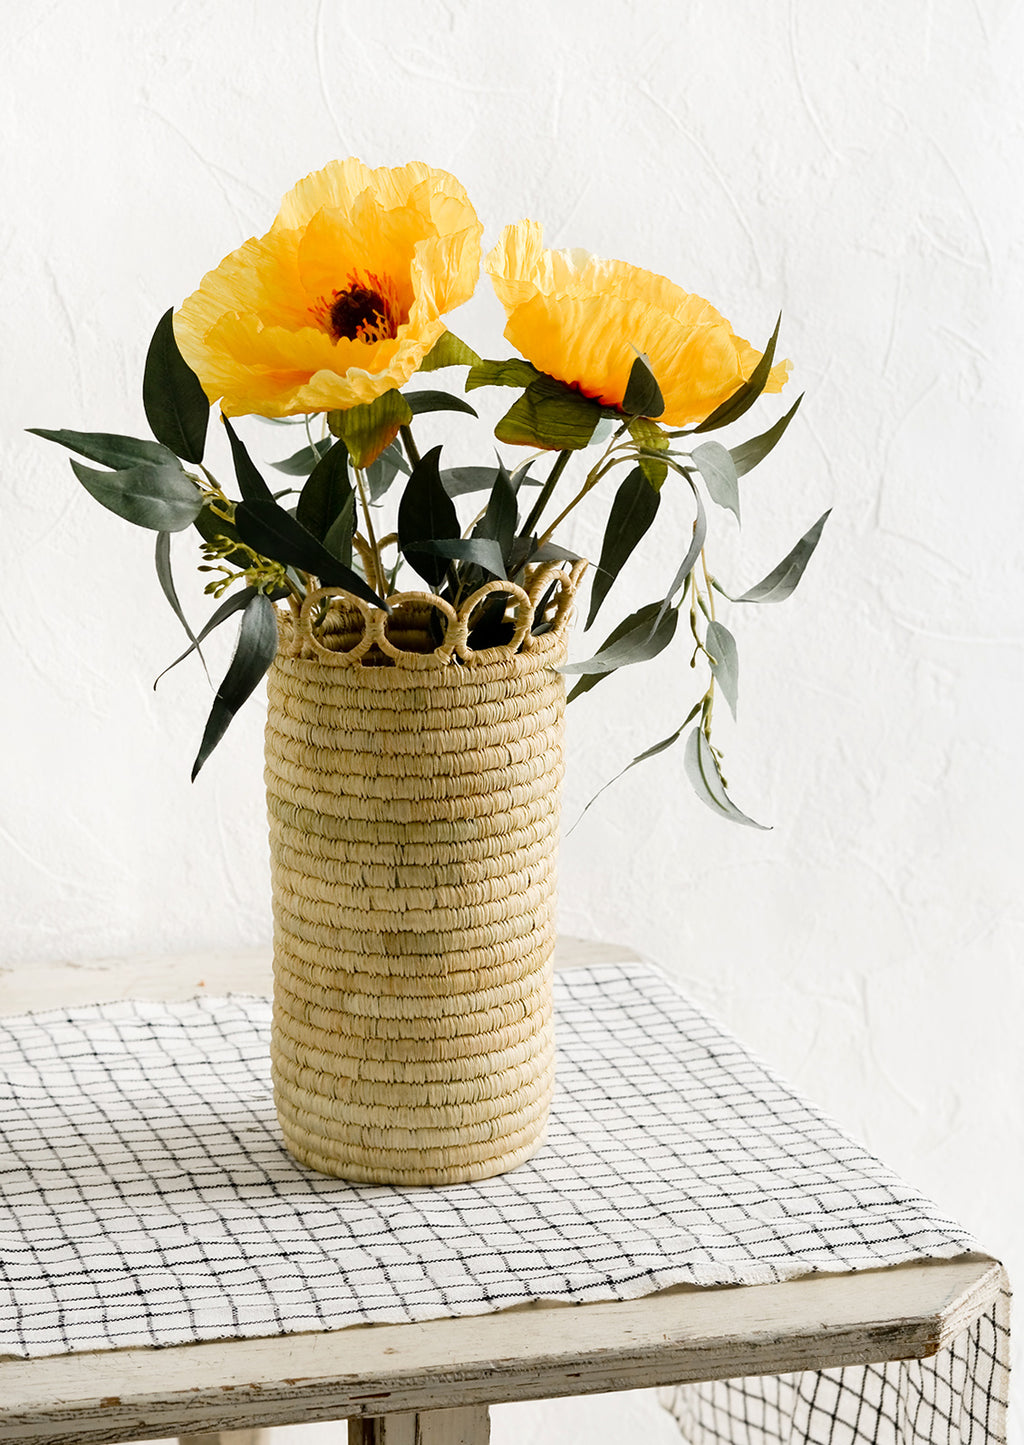 2: A cylindrical raffia vase on a linen-clad table with eucalyptus and poppies.